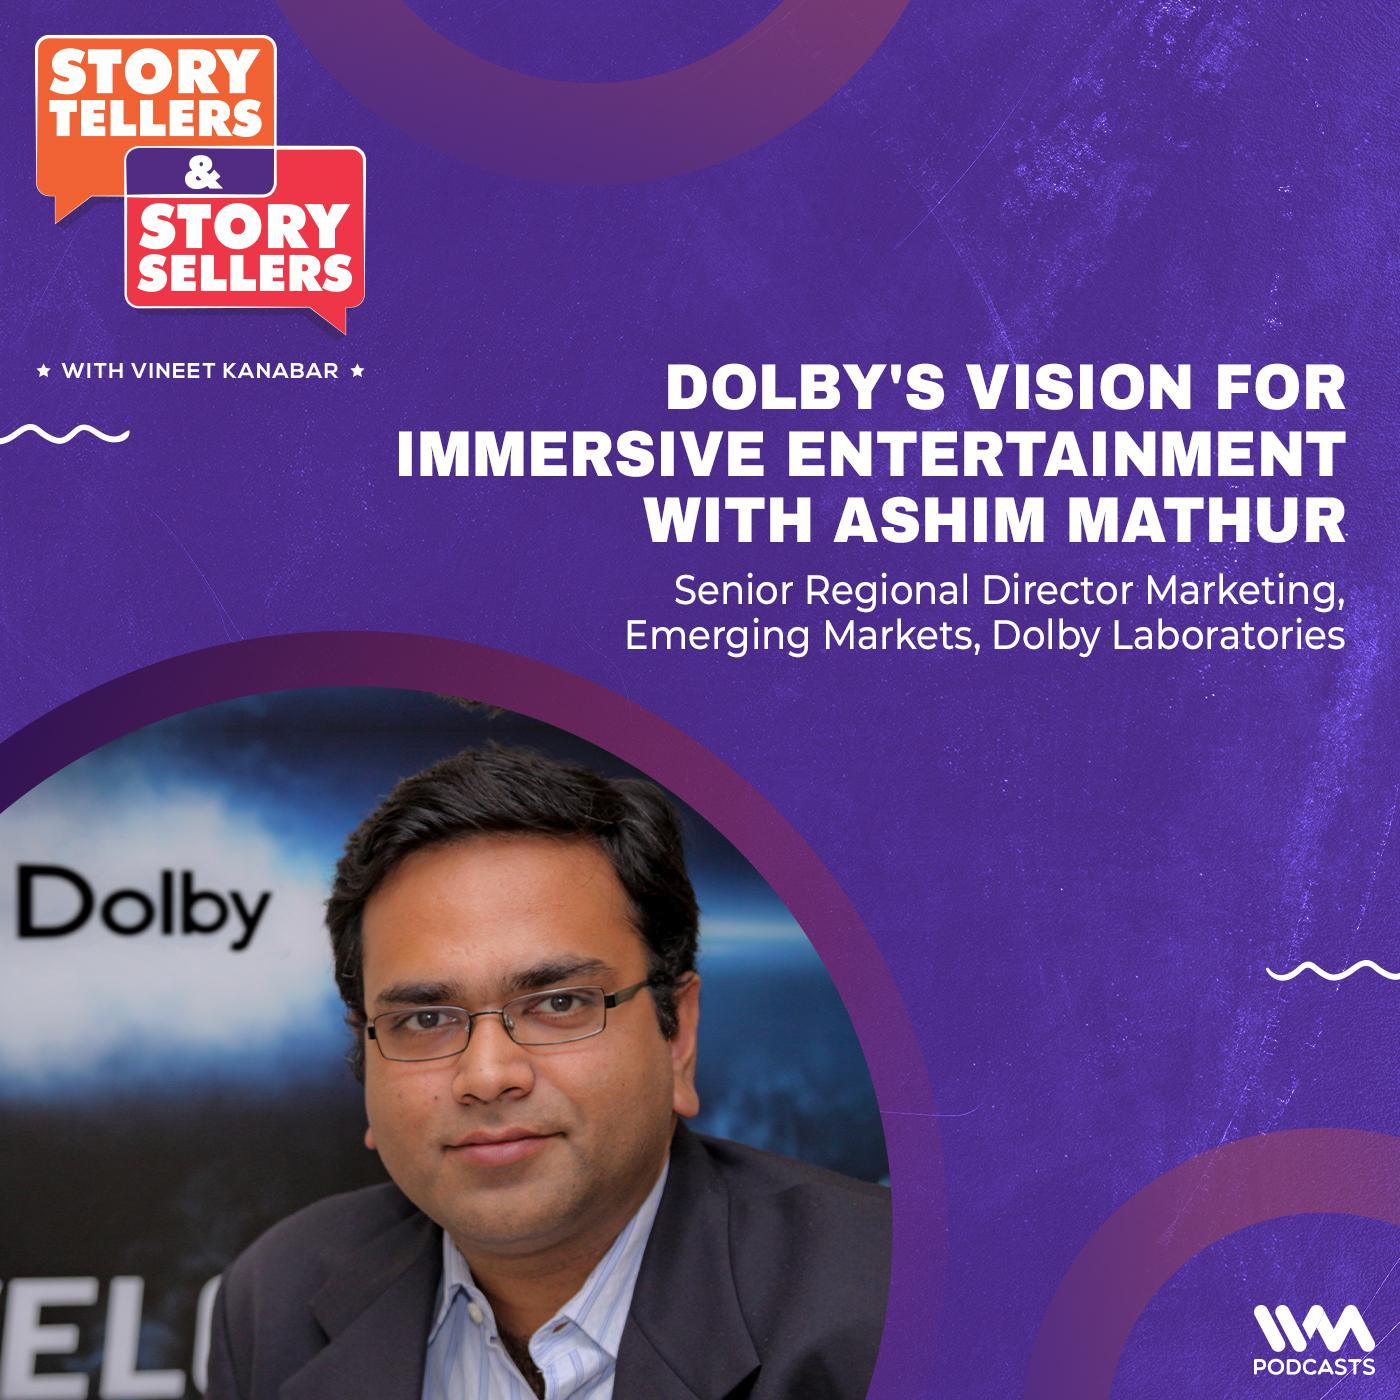 Ashim Mathur Talks About Dolby's Vision for Immersive Entertainment